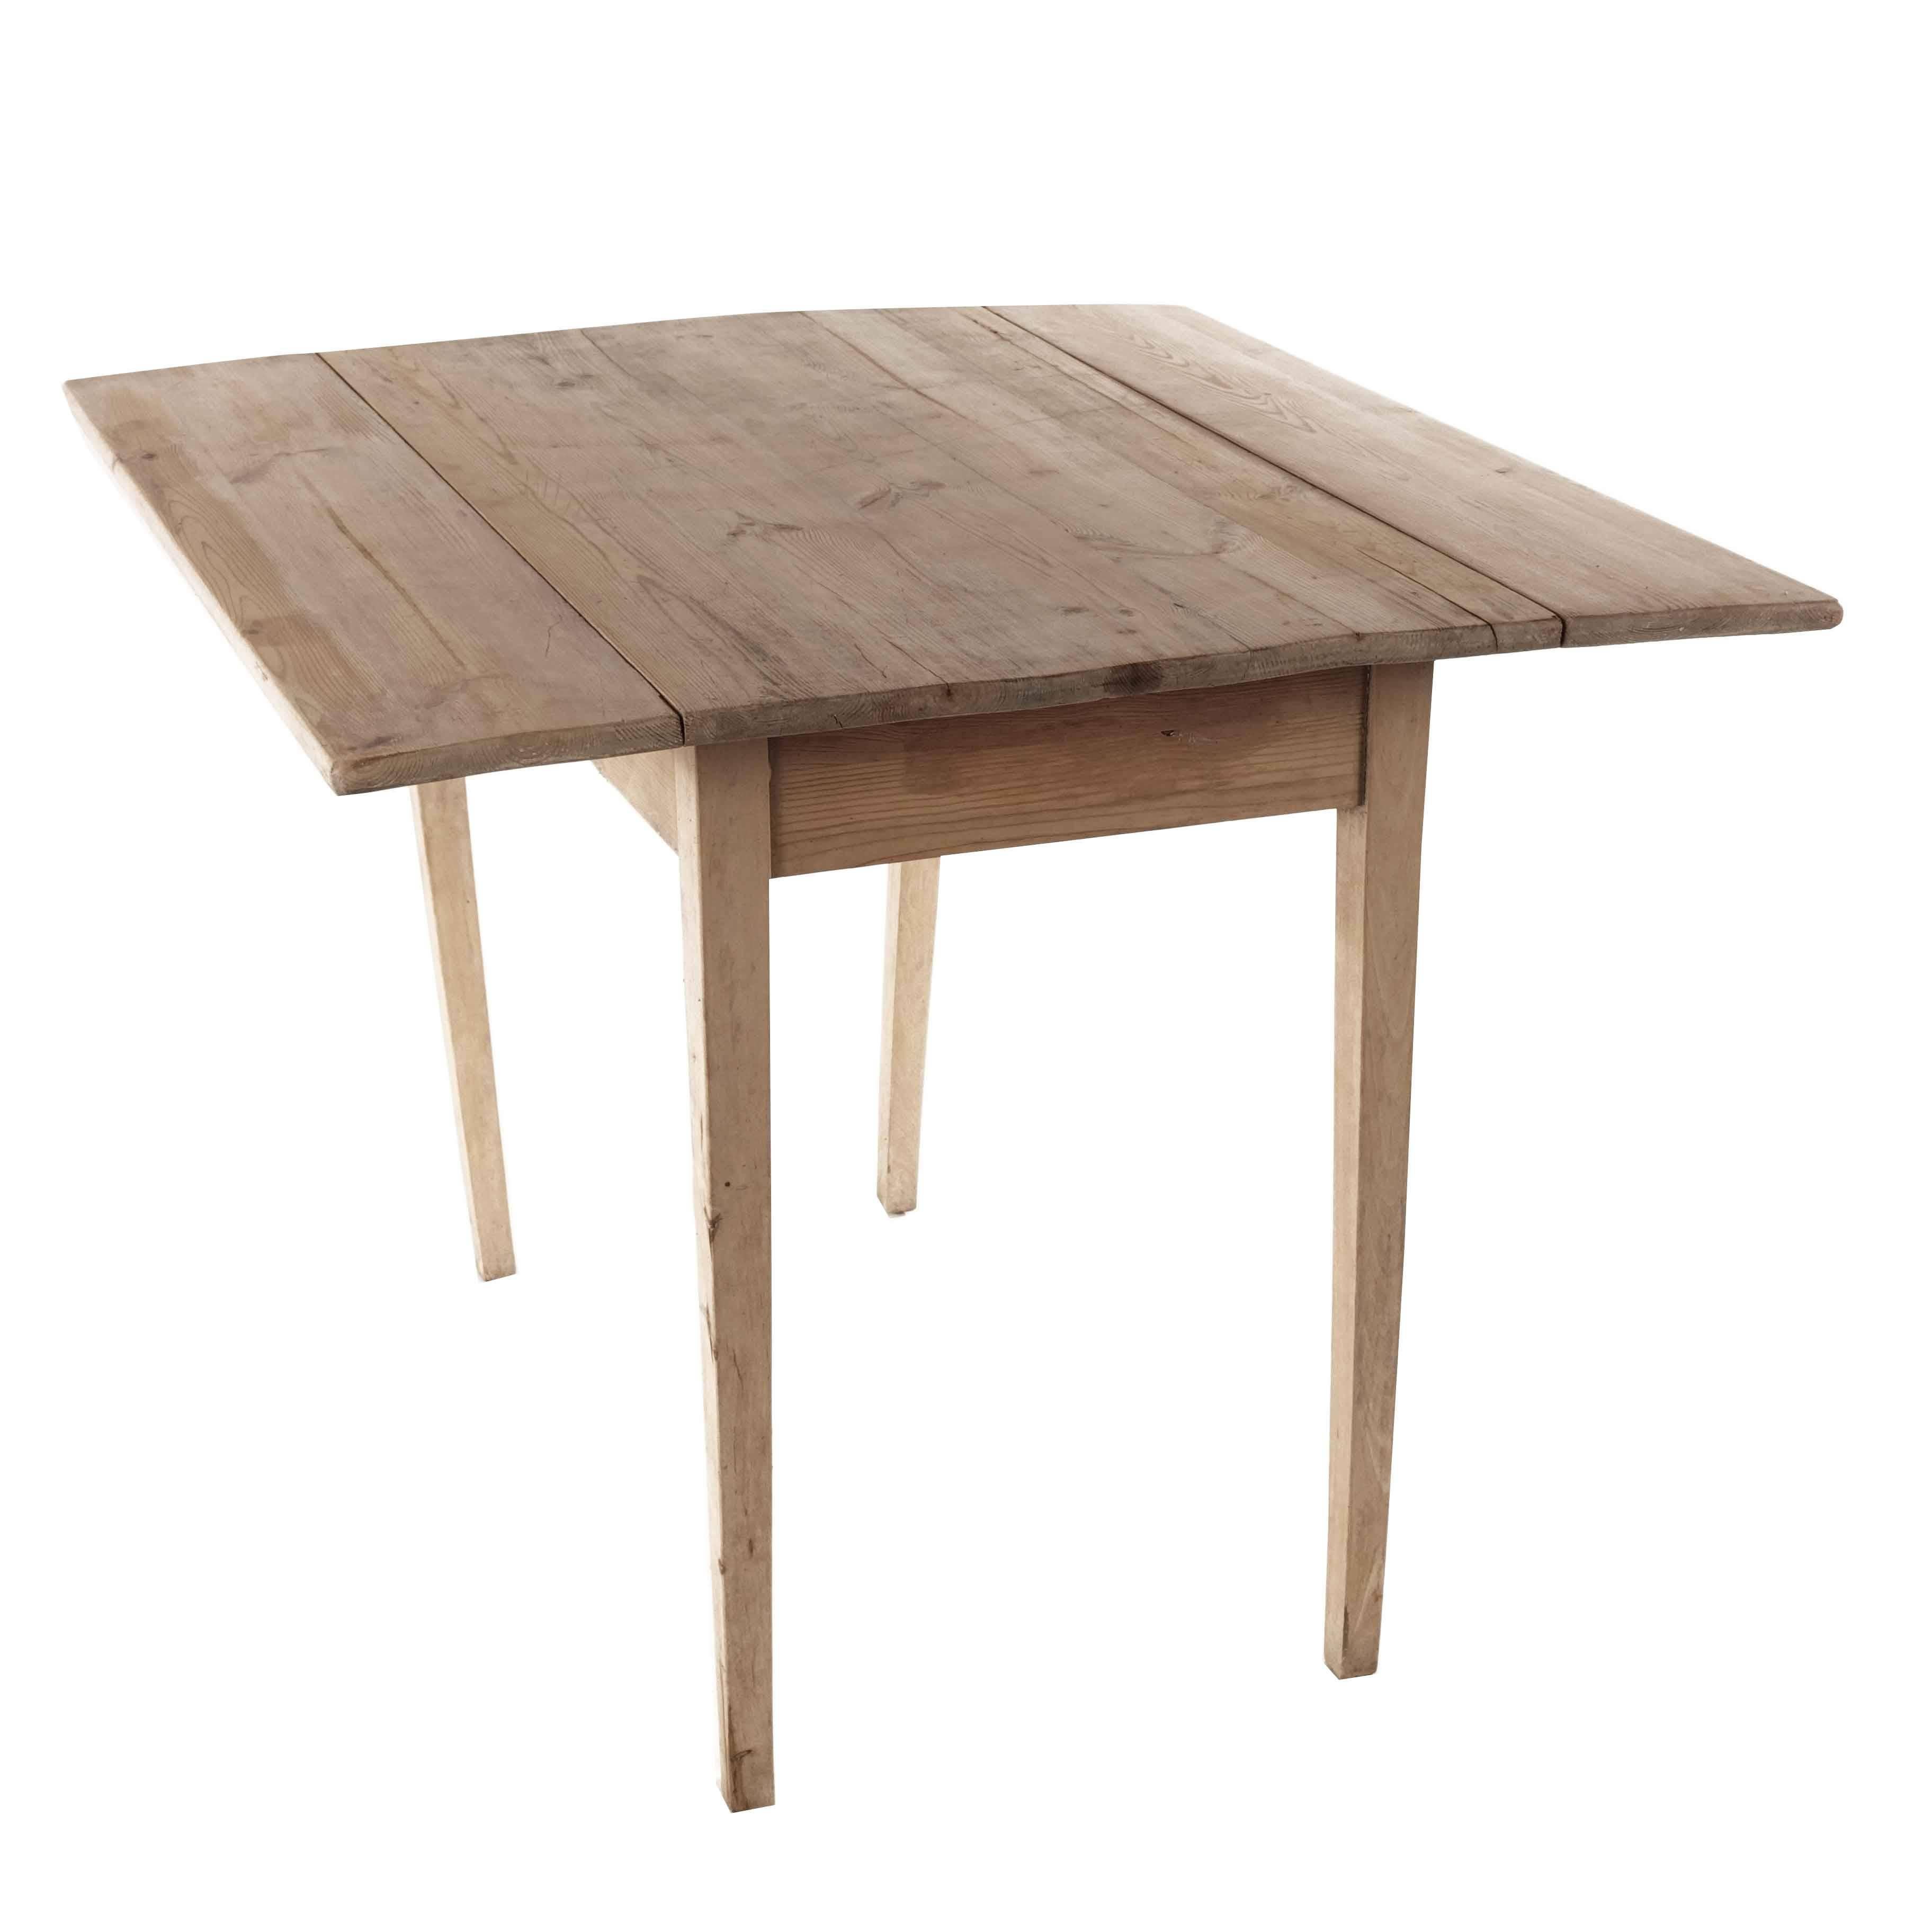 Swedish Antique Drop-Leaf Table in Pine, Late 1800s For Sale